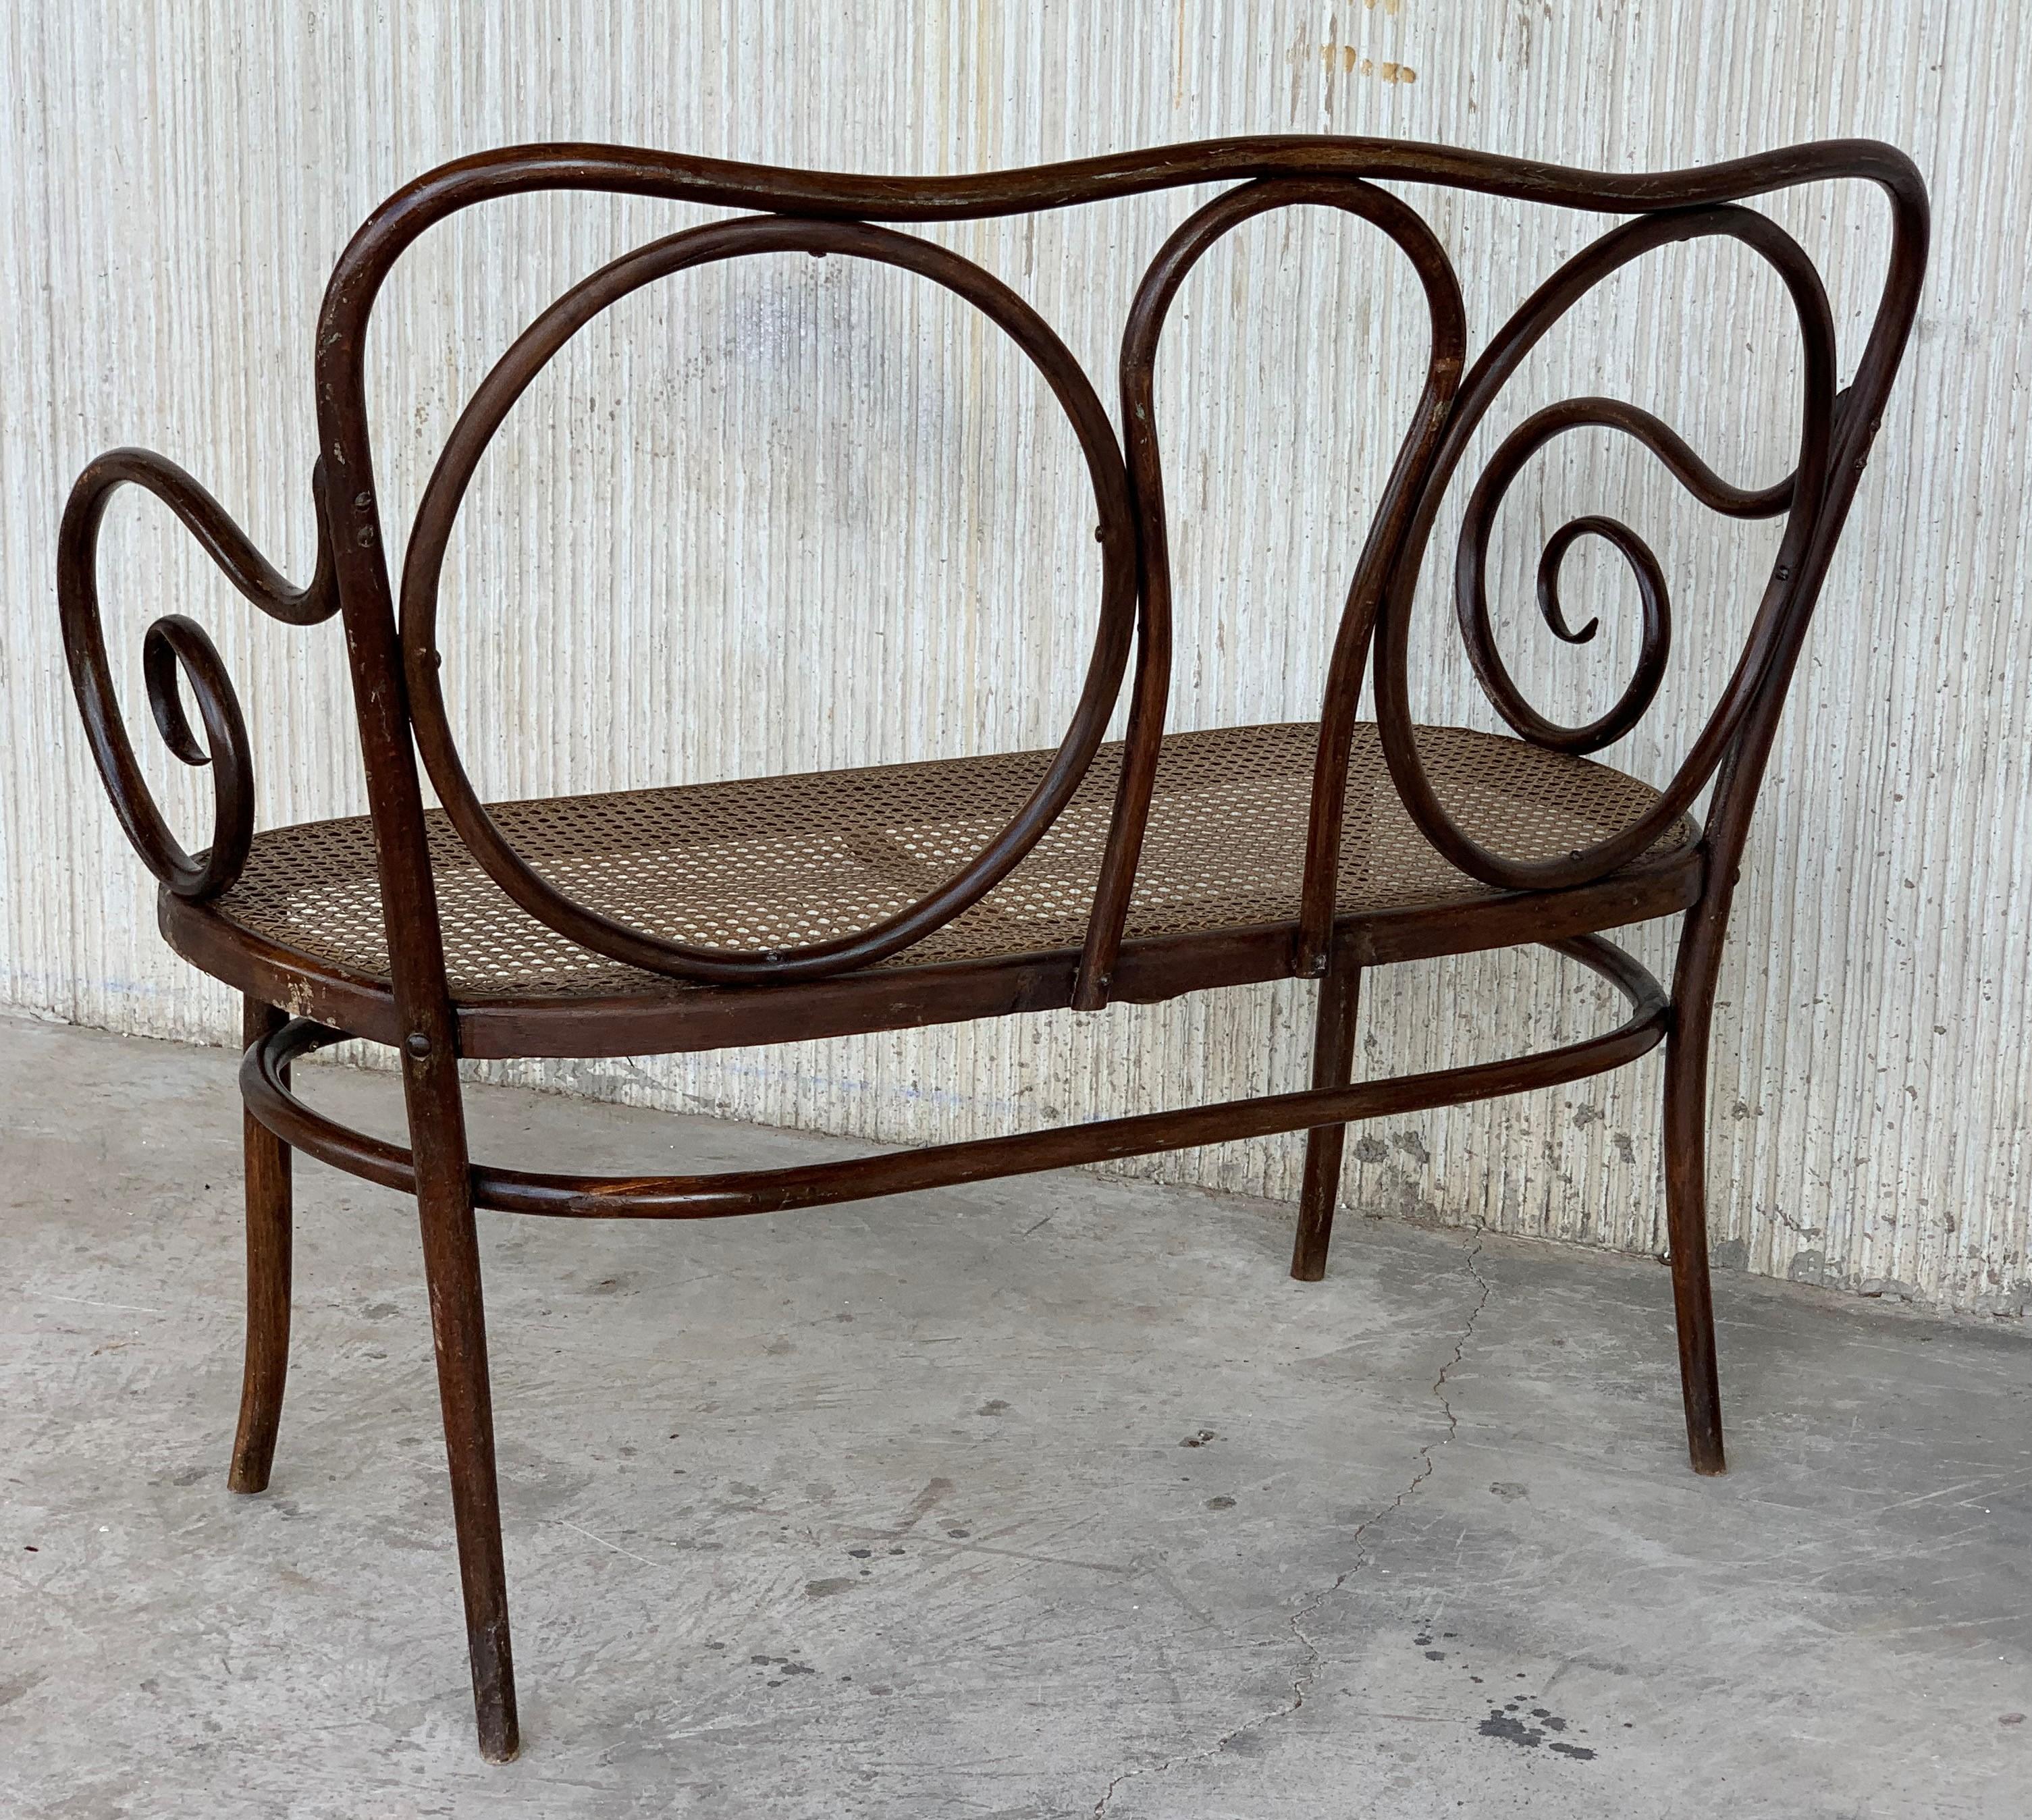 20th Century Bentwood Sofa in the Thonet Style, circa 1925, Caned Seat 4